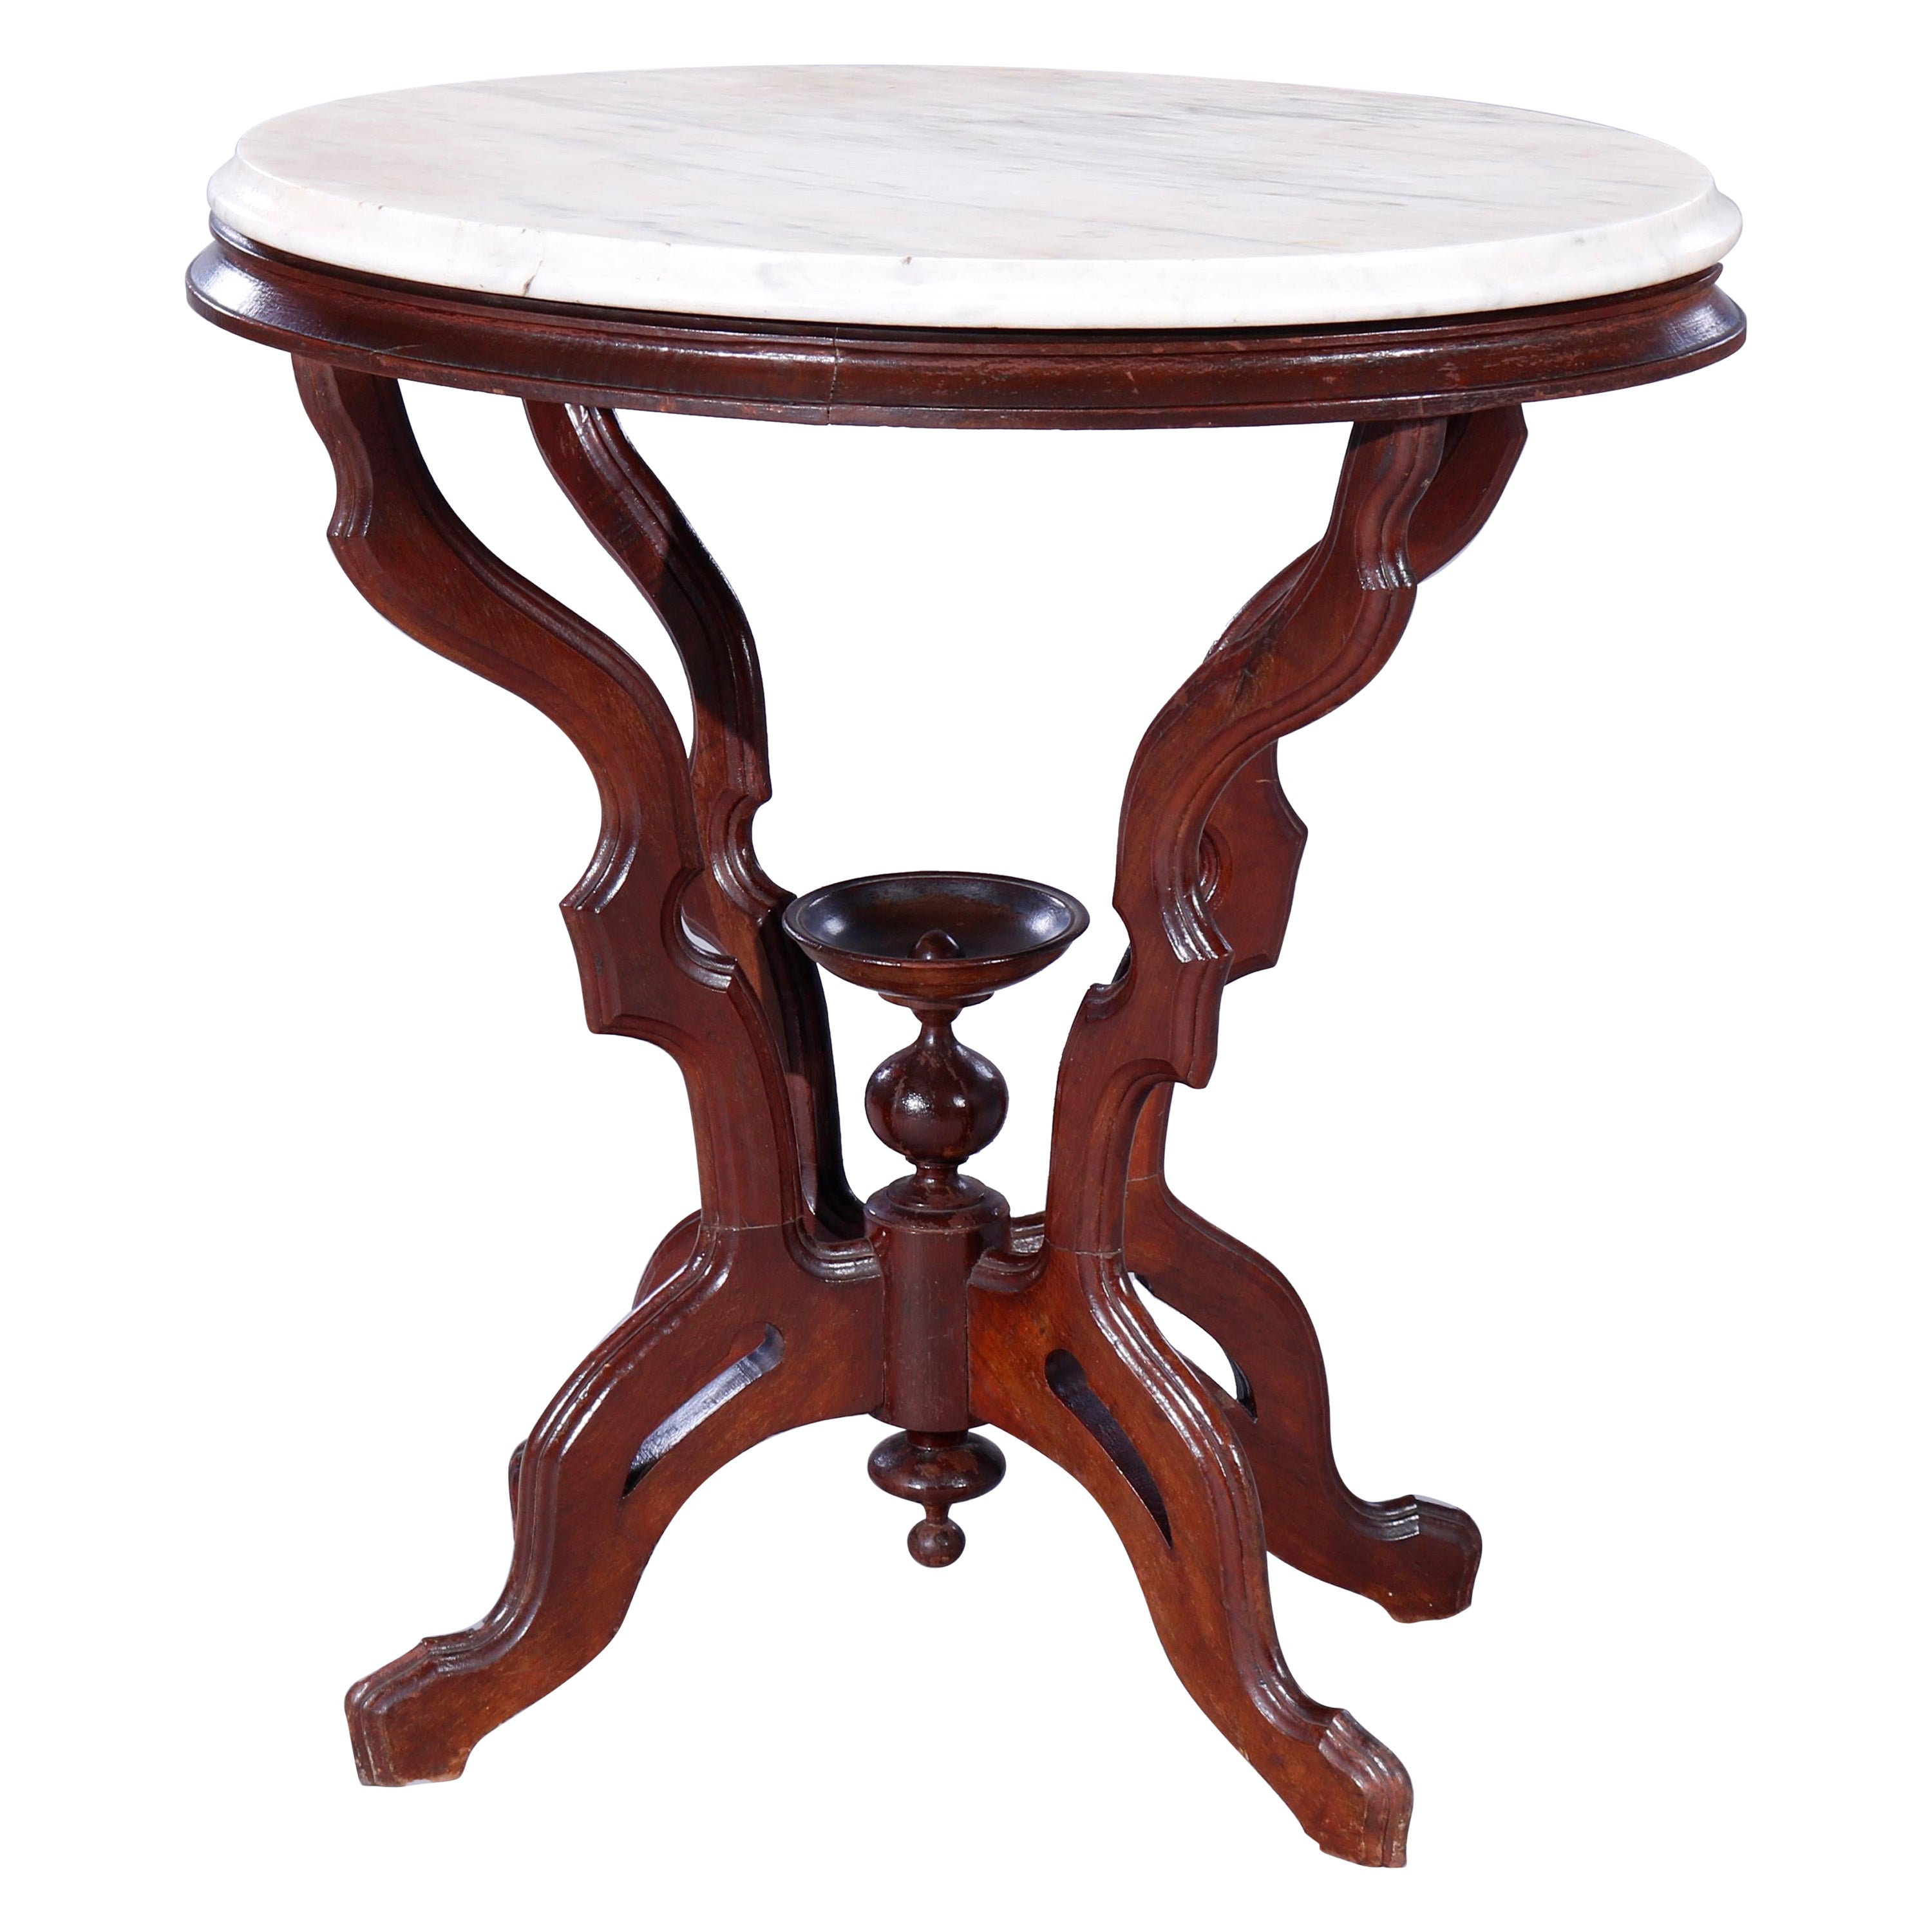 Antique Eastlake Oval Walnut & Marble Parlor Table, c1890